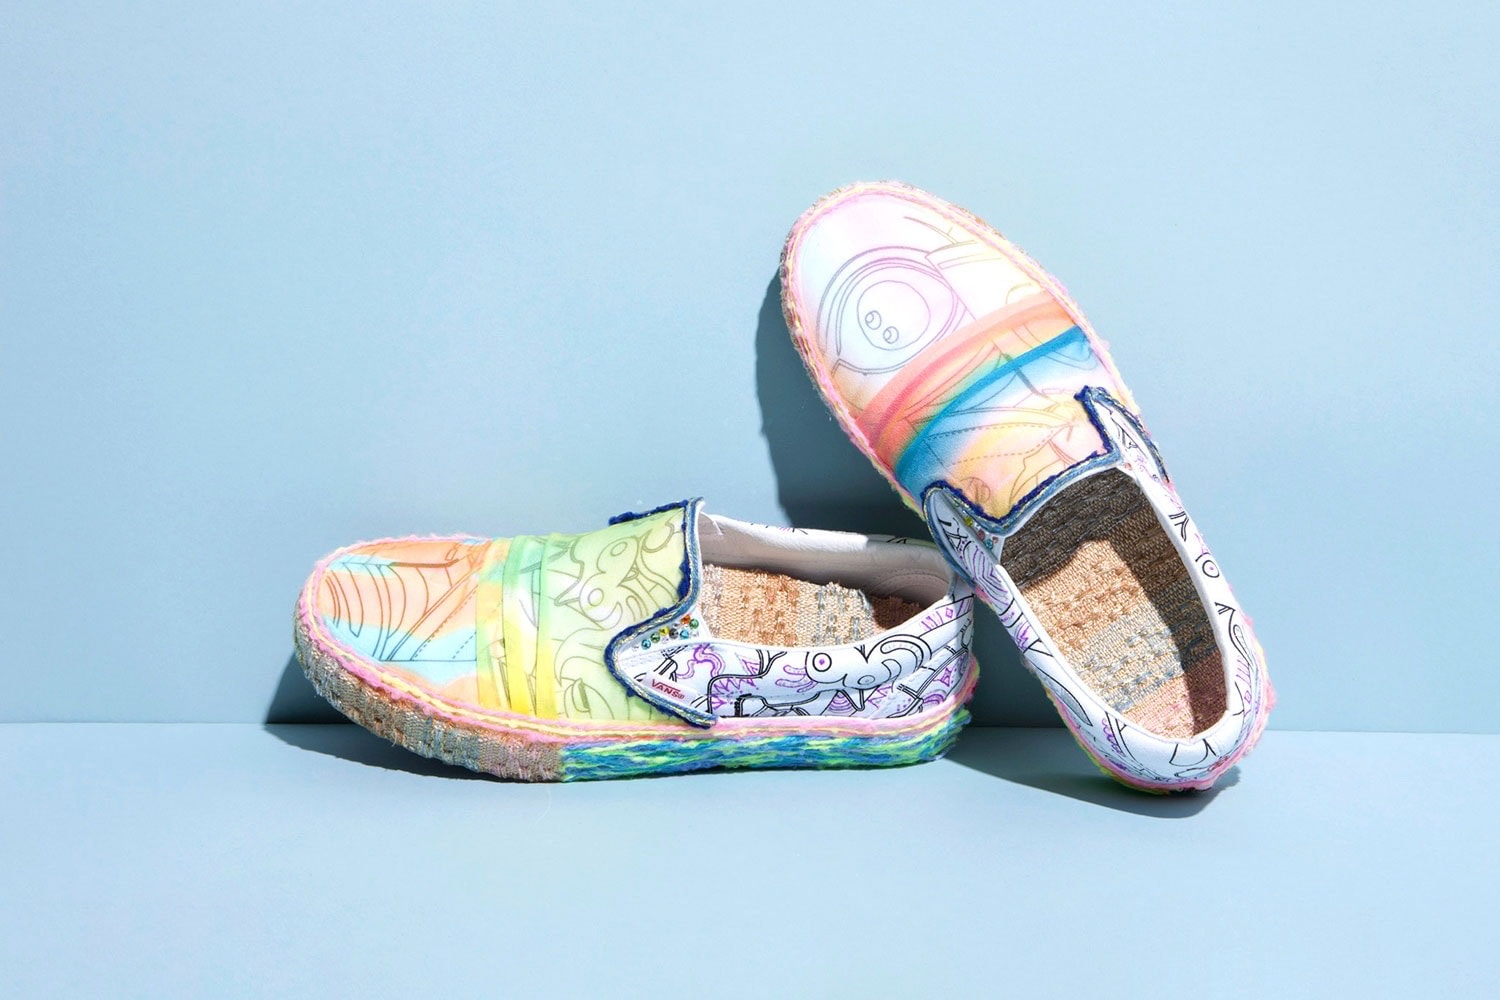 Marc Jacobs x Vans 2017 Summer Slip-On Collection